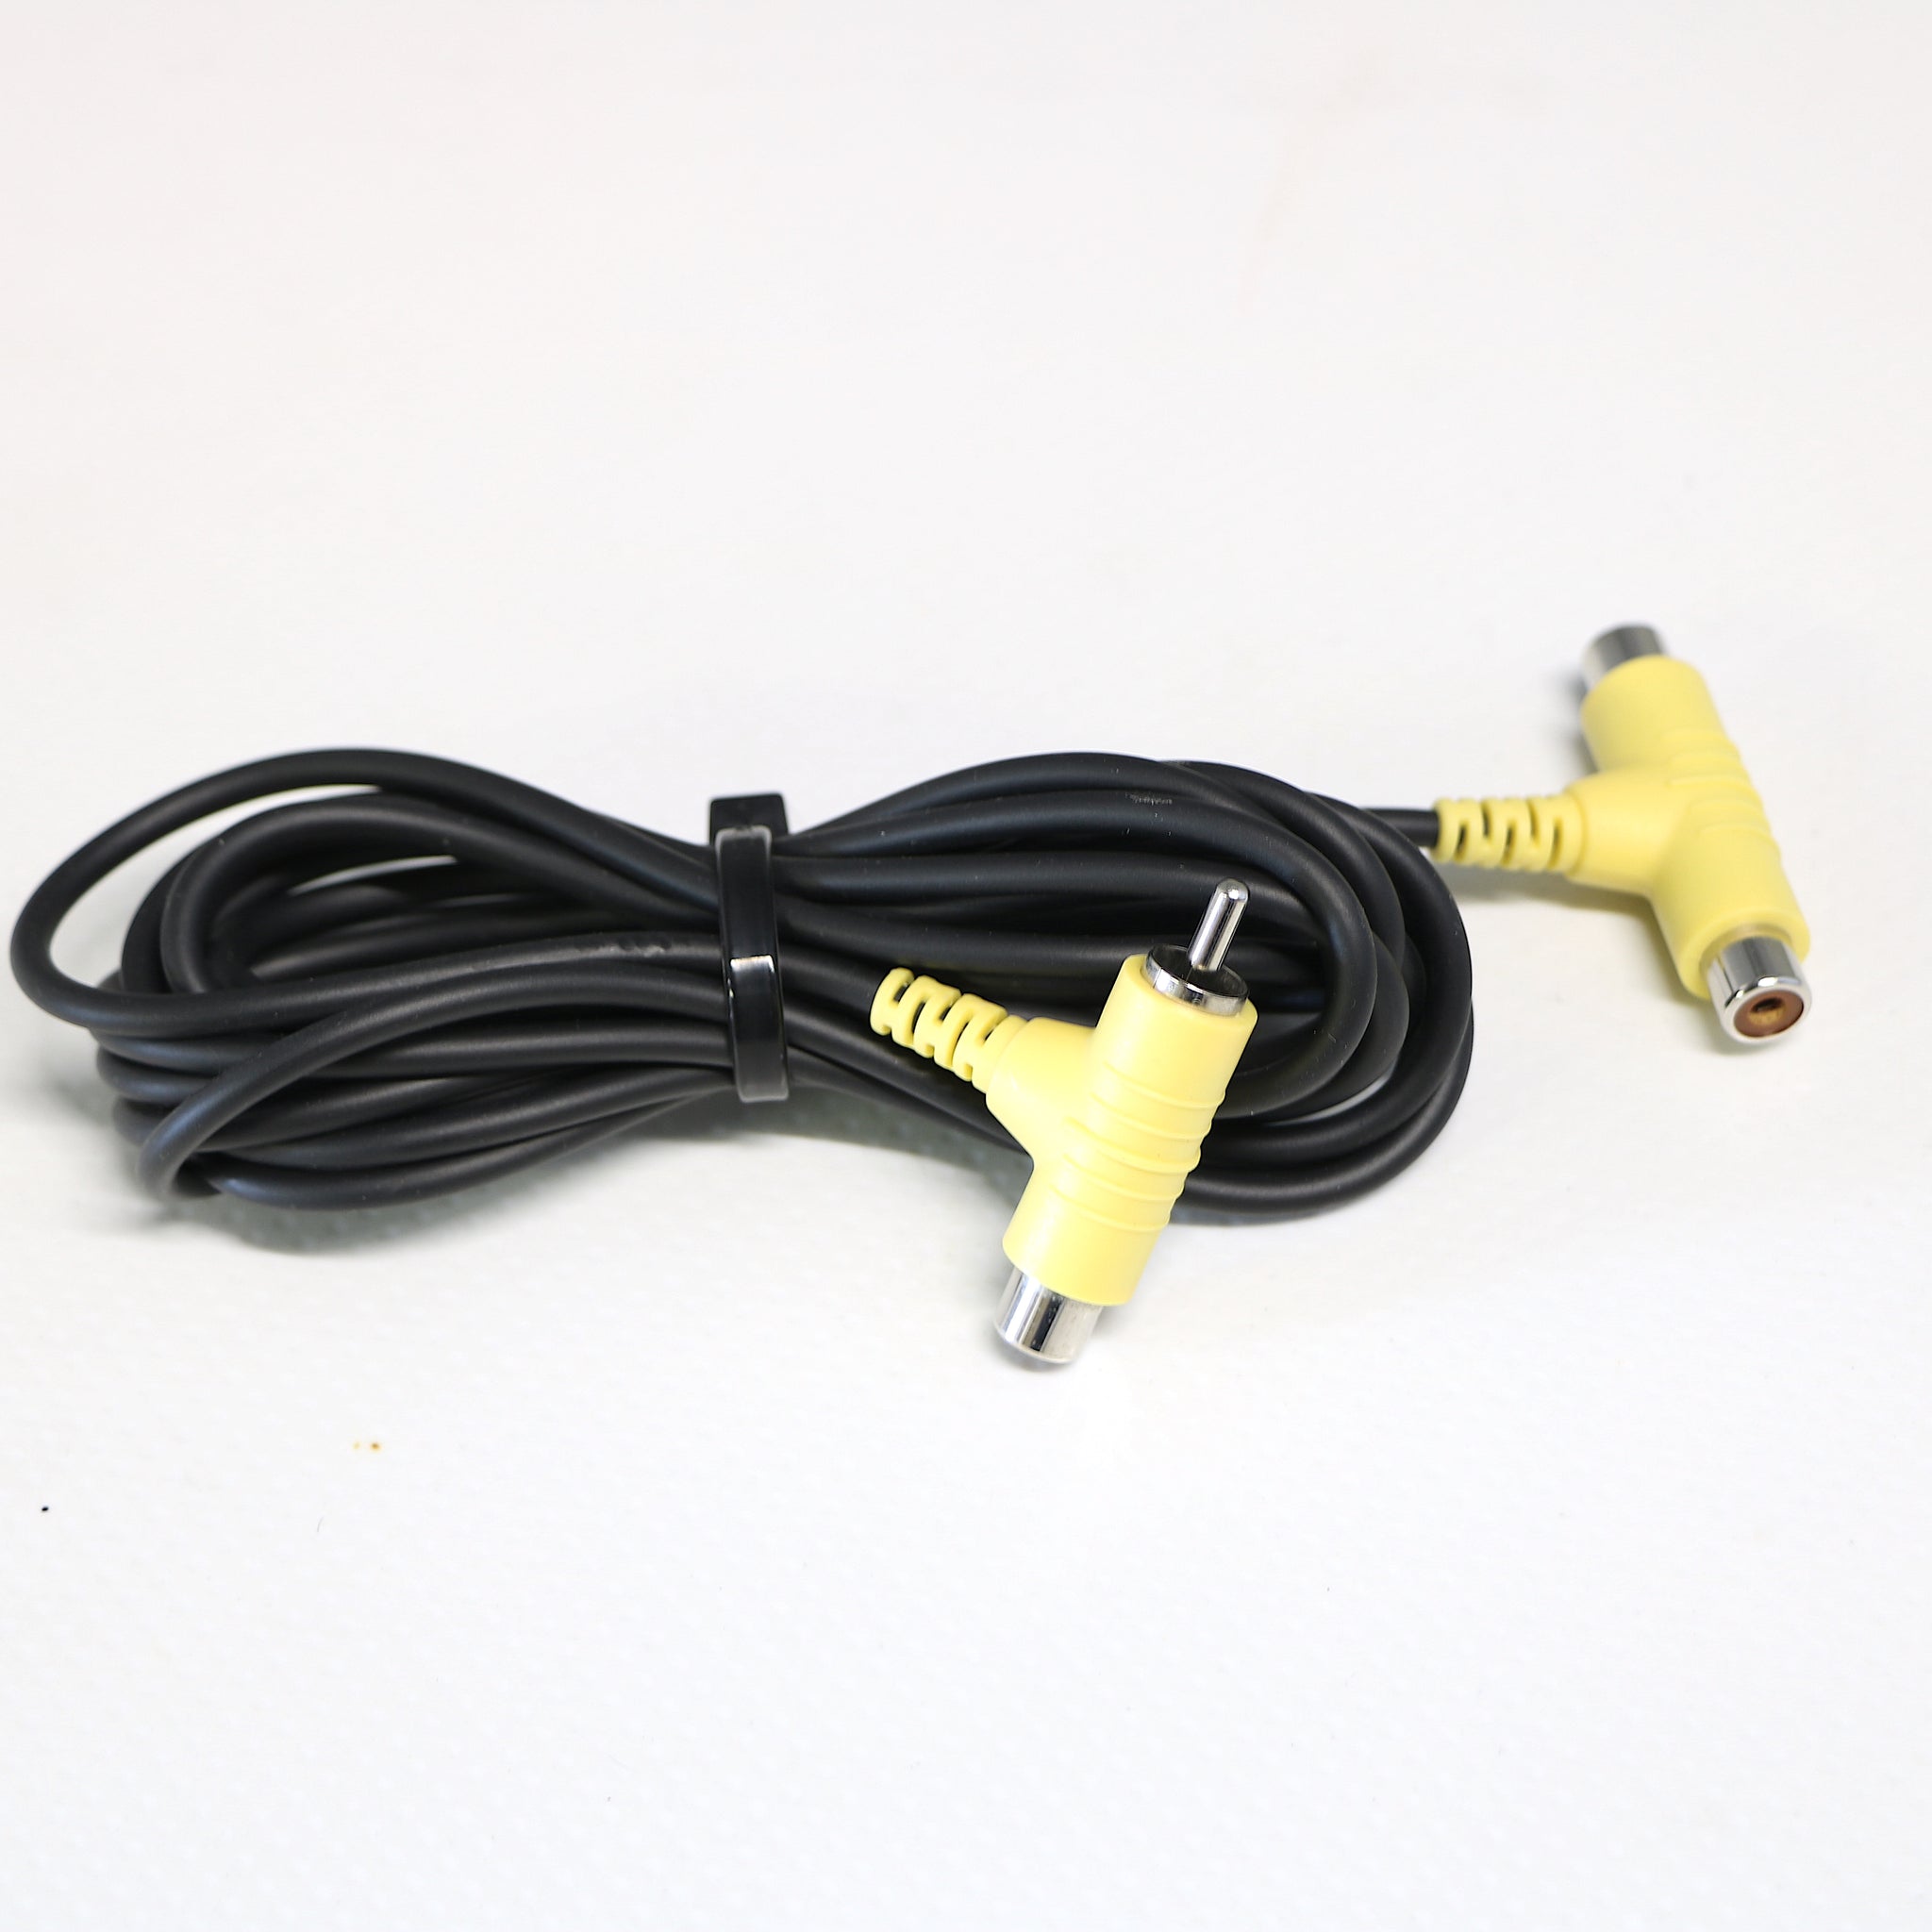 G-CON 2 Namco Gun AV Adaptor Extension Cable Lead For Playstation 1 & 2